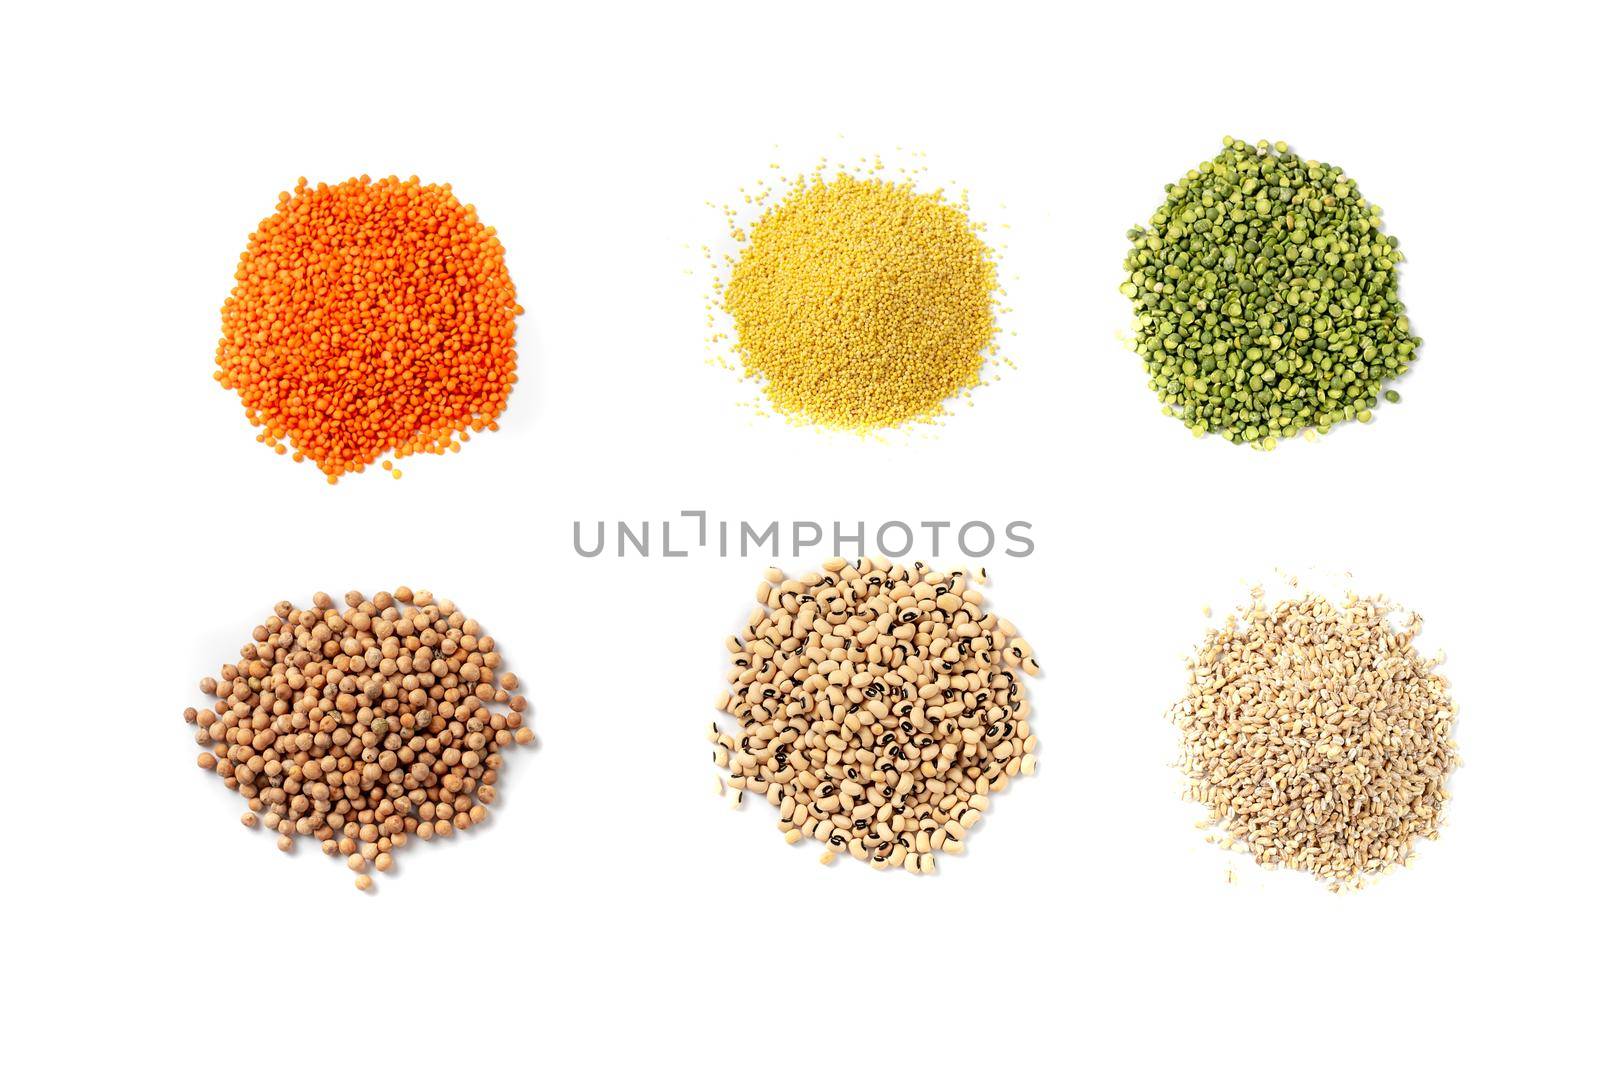 Gluten free cereals. Rice, buckwheat, corn groats, quinoa and millet in wooden bowls. Top view flat lay with copy space. Super food tag with fenugreek seeds, bukwheat seeds, gold linseeds and brown linseeds. Superfood on a white background. Set from Ancient grain food top view. Healthy eating. Alternative to staple foods. Gluten free.